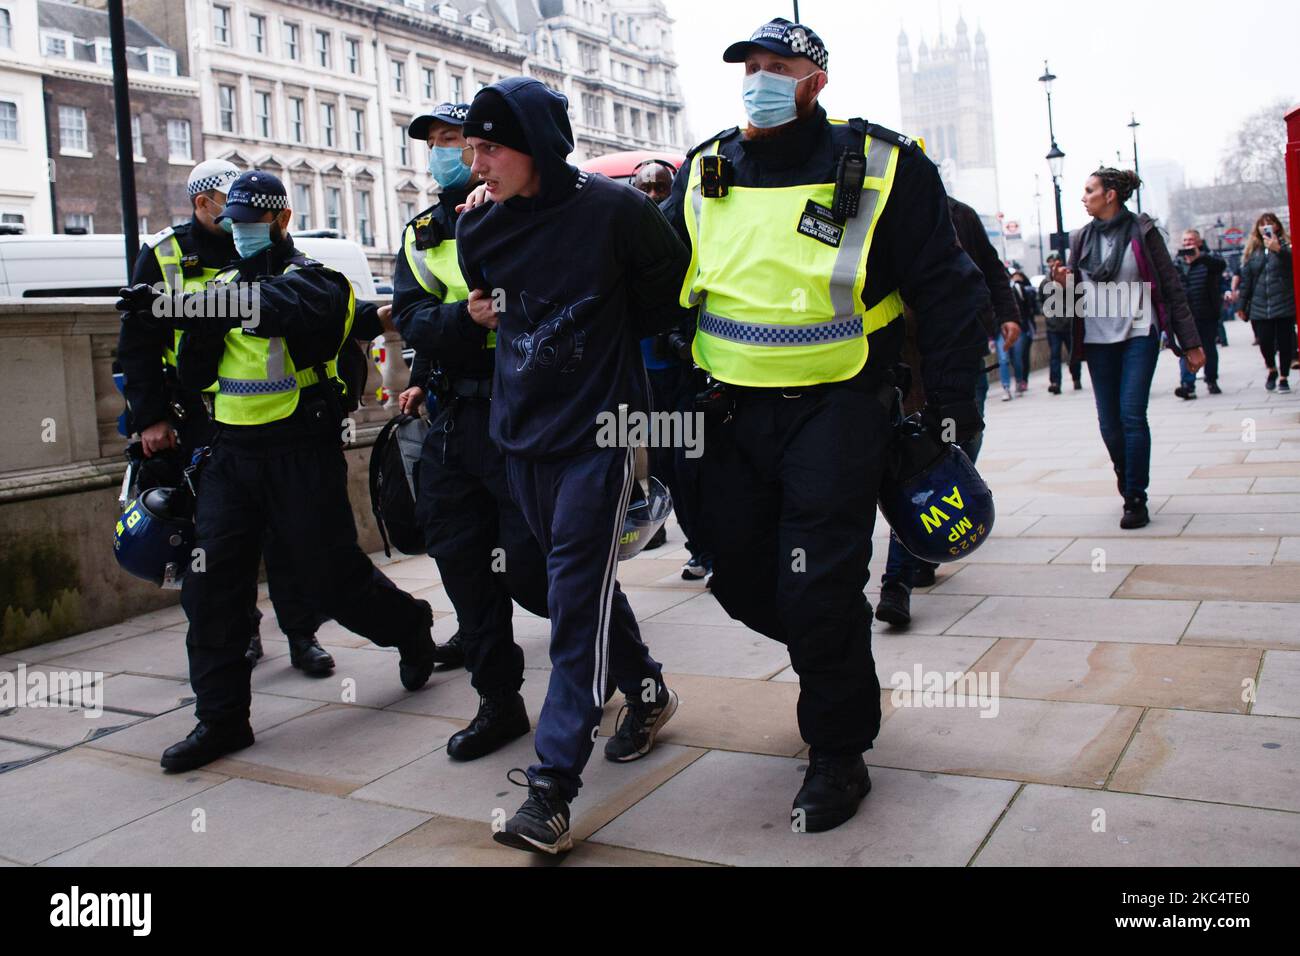 An anti-lockdown activist is arrested on Parliament Street during a demonstration in London, England, on November 28, 2020. In an evening update the Metropolitan Police announced it had made 155 arrests over the course of the day's demonstrations, for offences including breaches of coronavirus regulations, assault on police and possession of drugs. London is to return to 'Tier 2' or 'high alert' covid-19 restrictions once the current England-wide coronavirus lockdown ends next Wednesday. All three of the tiers, assigned to local authorities across England, have been strengthened since the lock Stock Photo